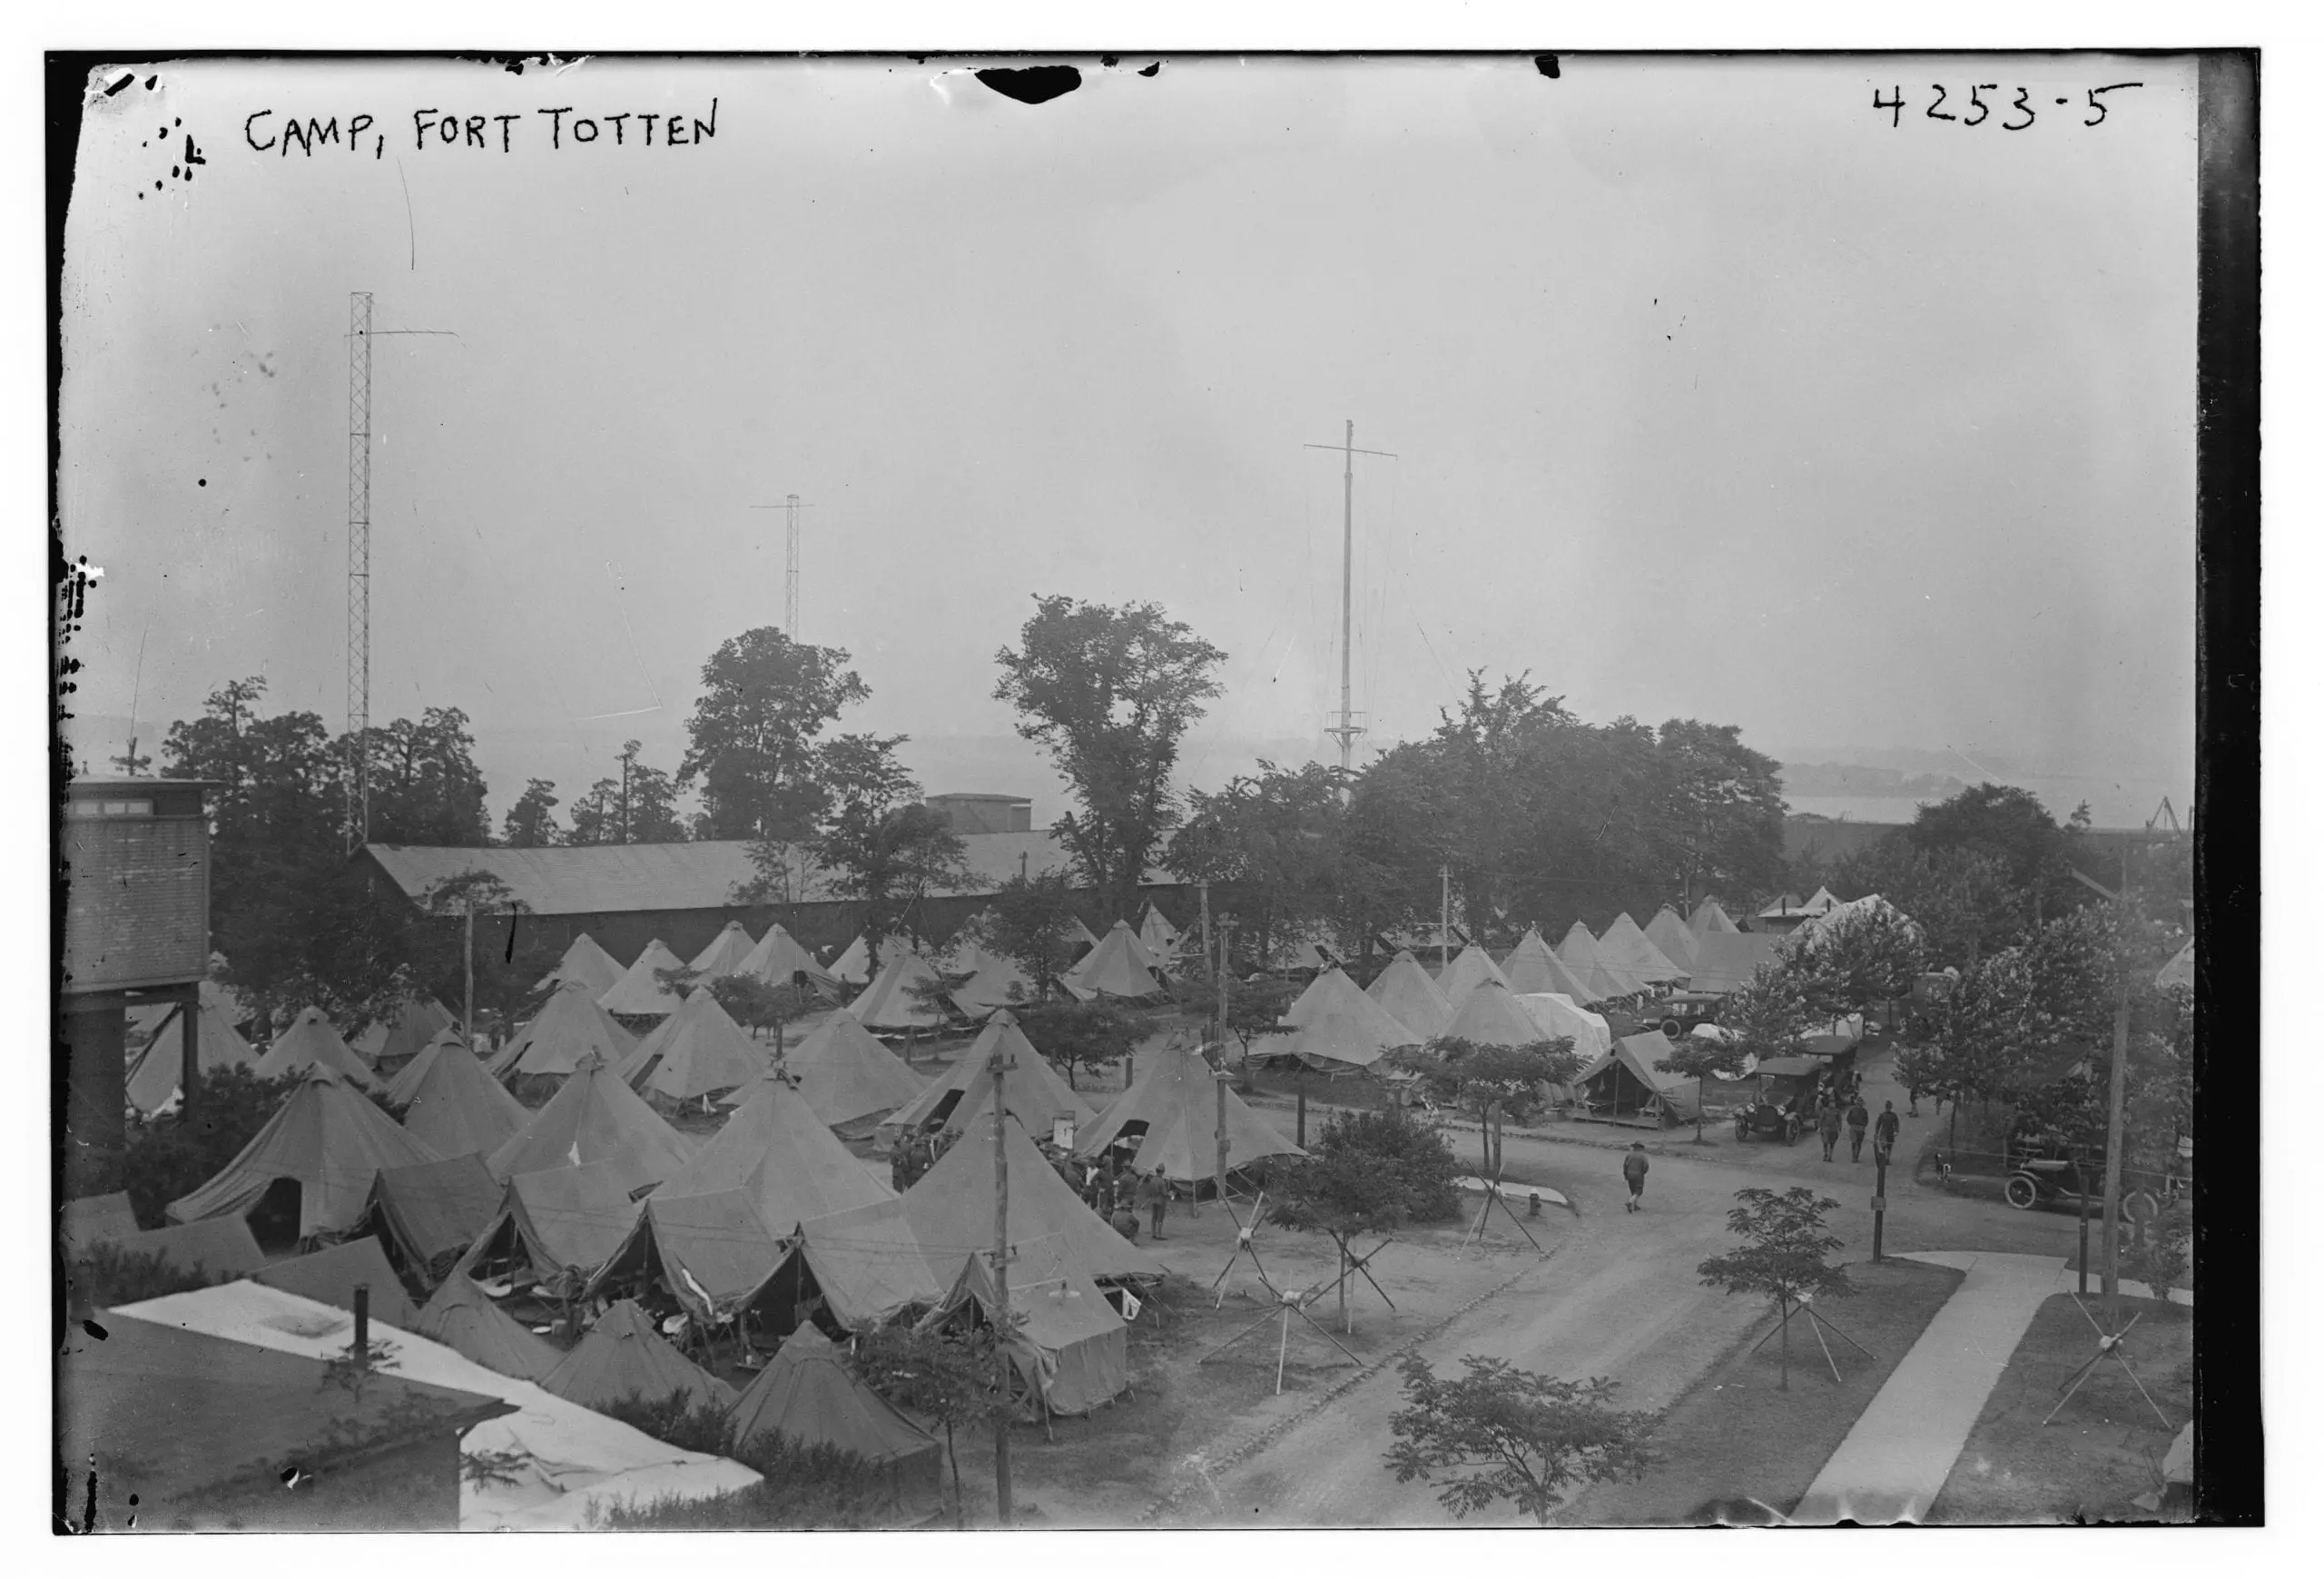 Camp, Fort Totten